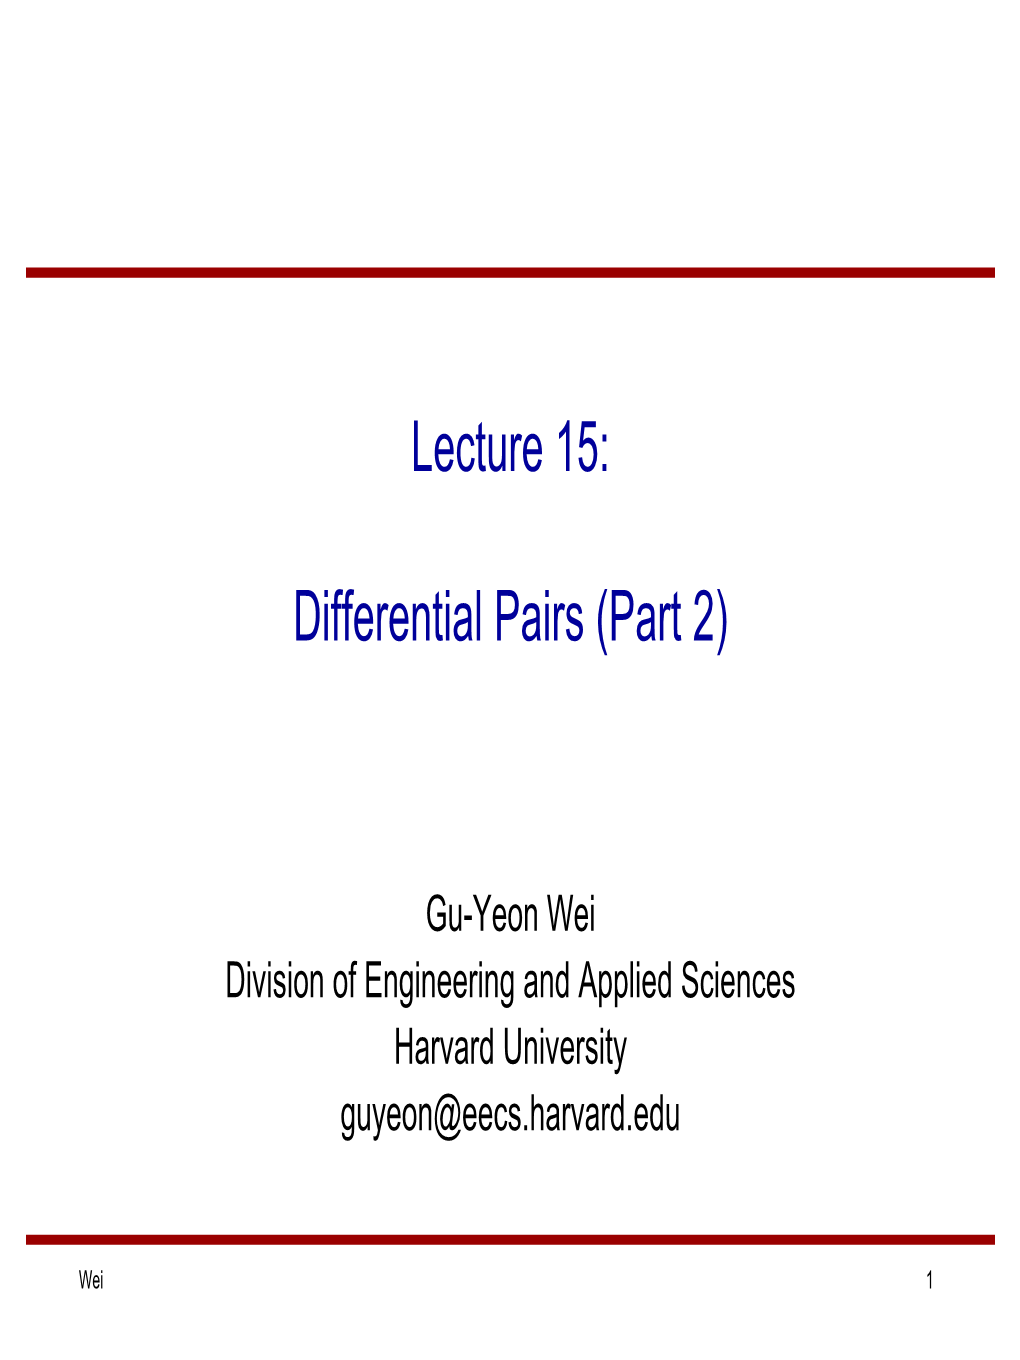 Lecture 15: Differential Pairs (Part 2)